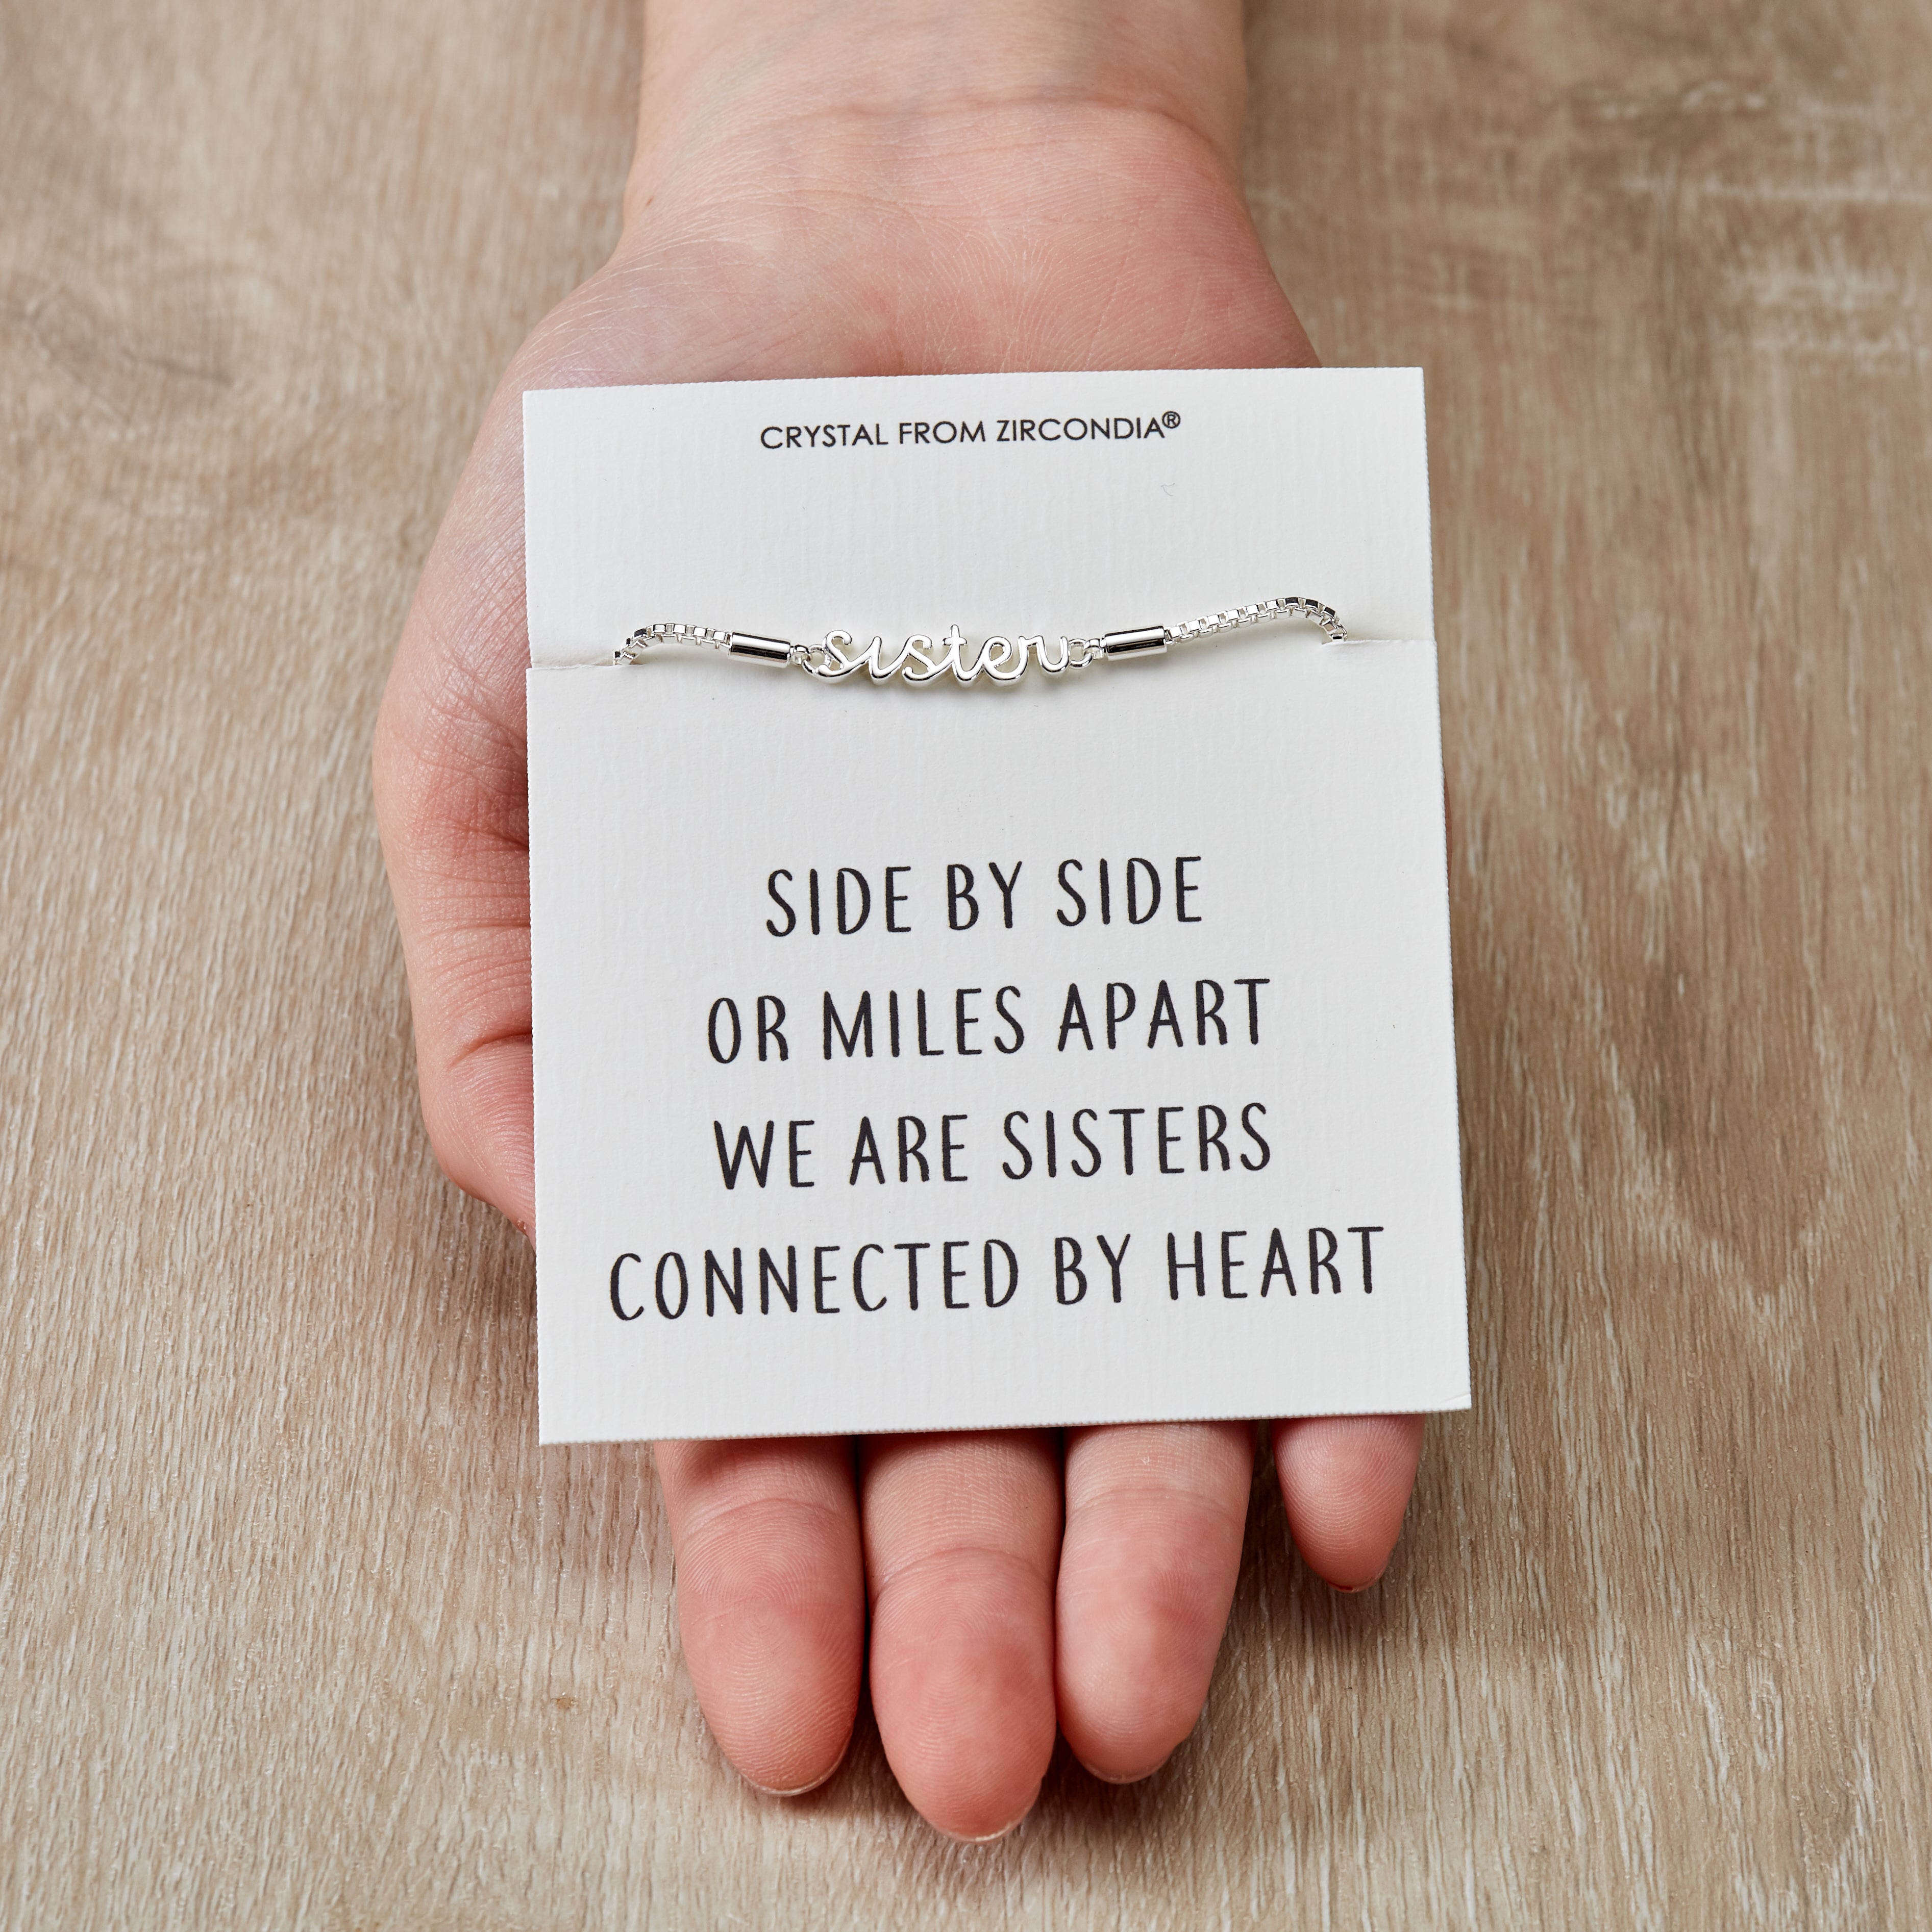 Sister Bracelet with Quote Card Created with Zircondia® Crystals